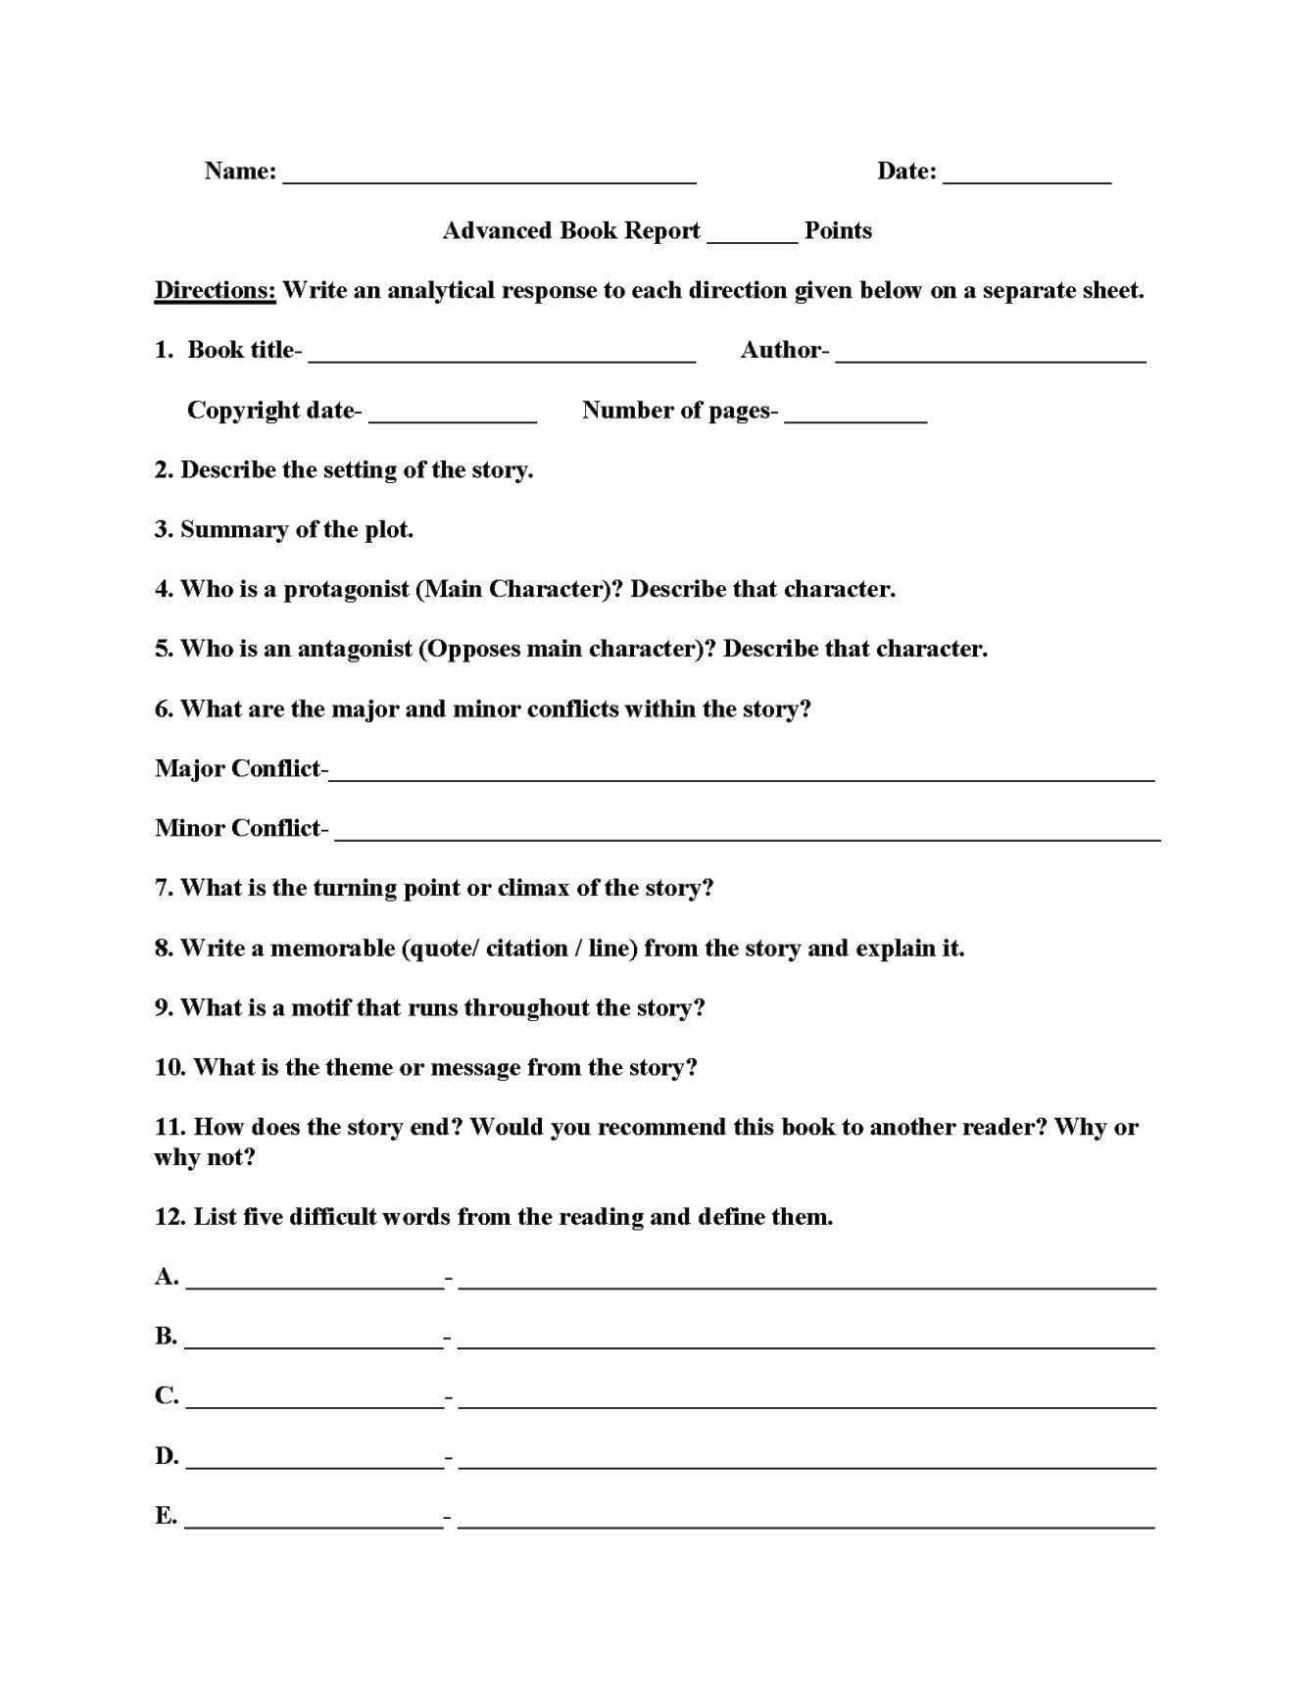 Worksheet 4Th Grade Report | Printable Worksheets And Within Book Report Template 4Th Grade